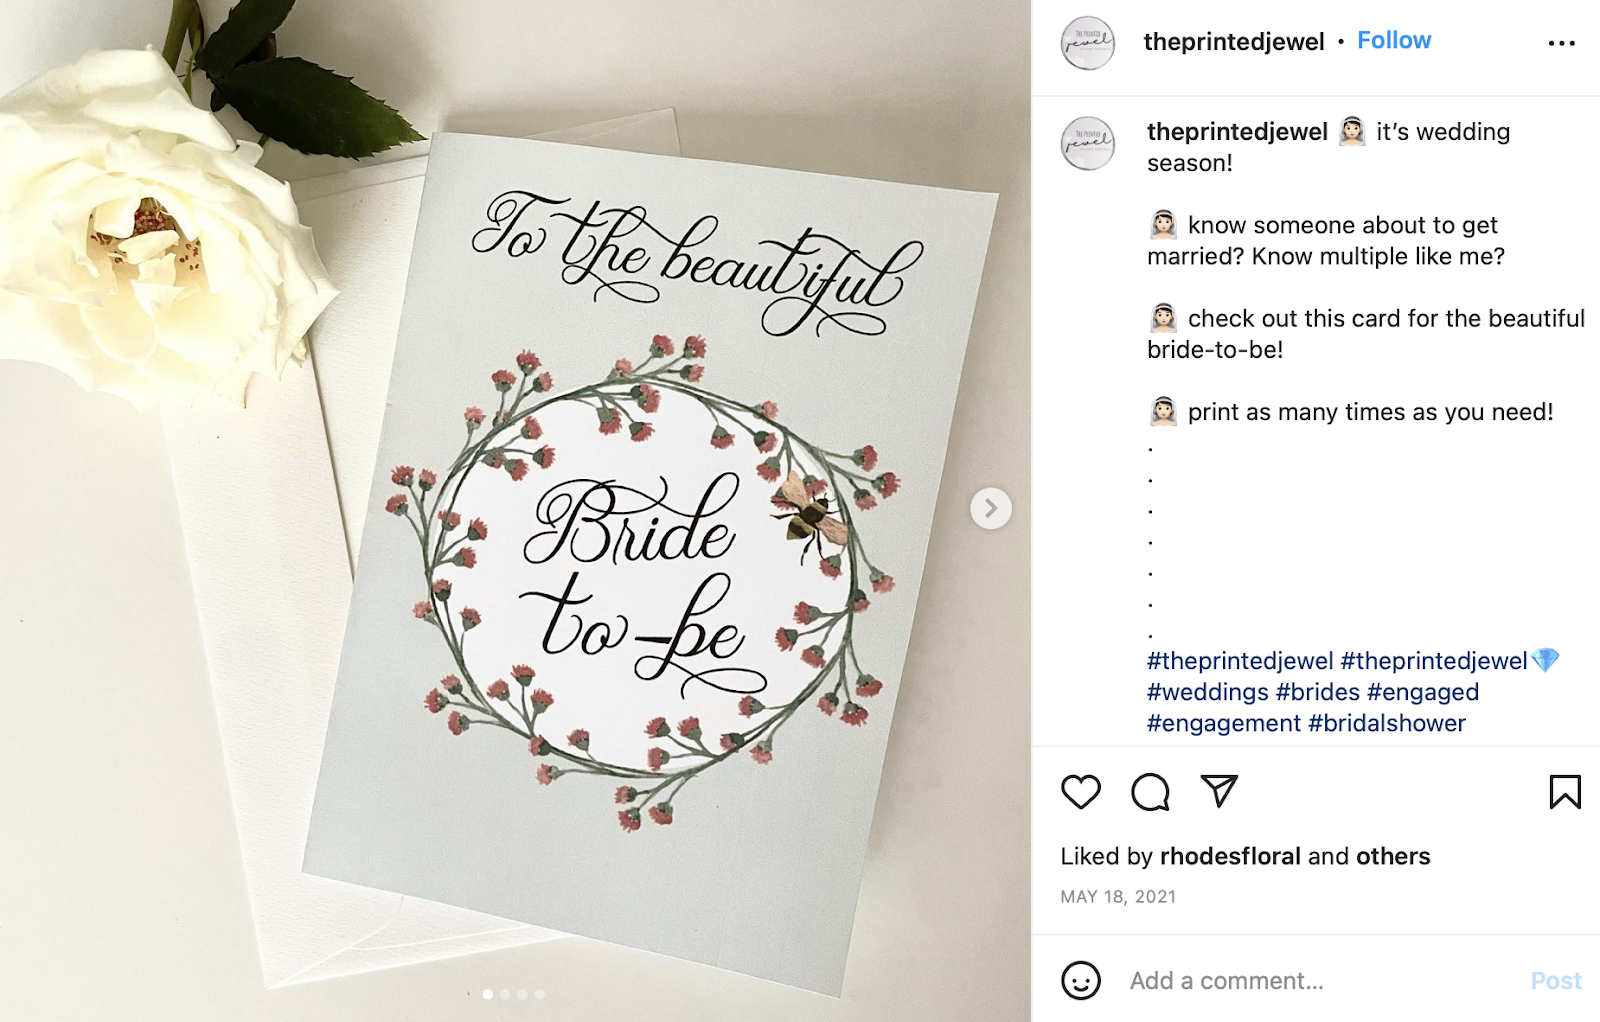 wedding card for the bride-to-be Instagram post